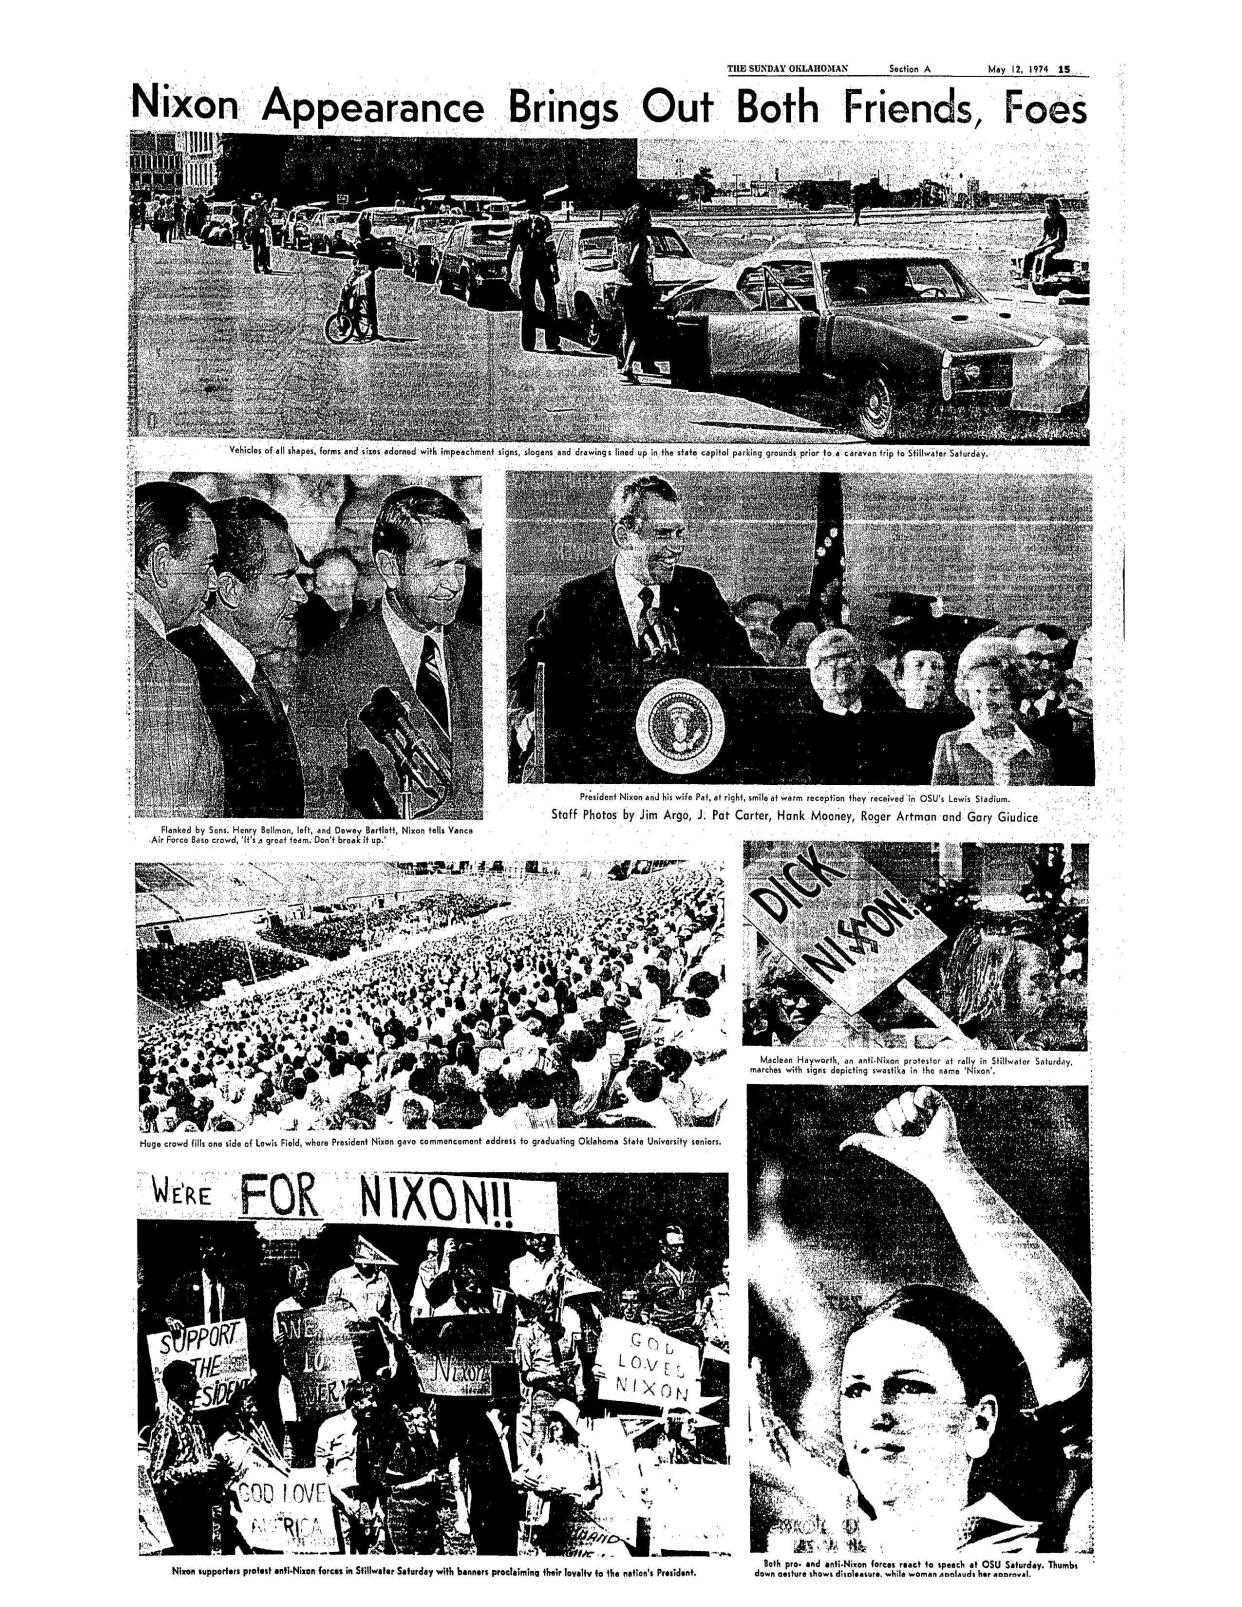 The May 12, 1974, publication of The Sunday Oklahoman included a full page of photos from President Richard Nixon's visit to Oklahoma the previous day.